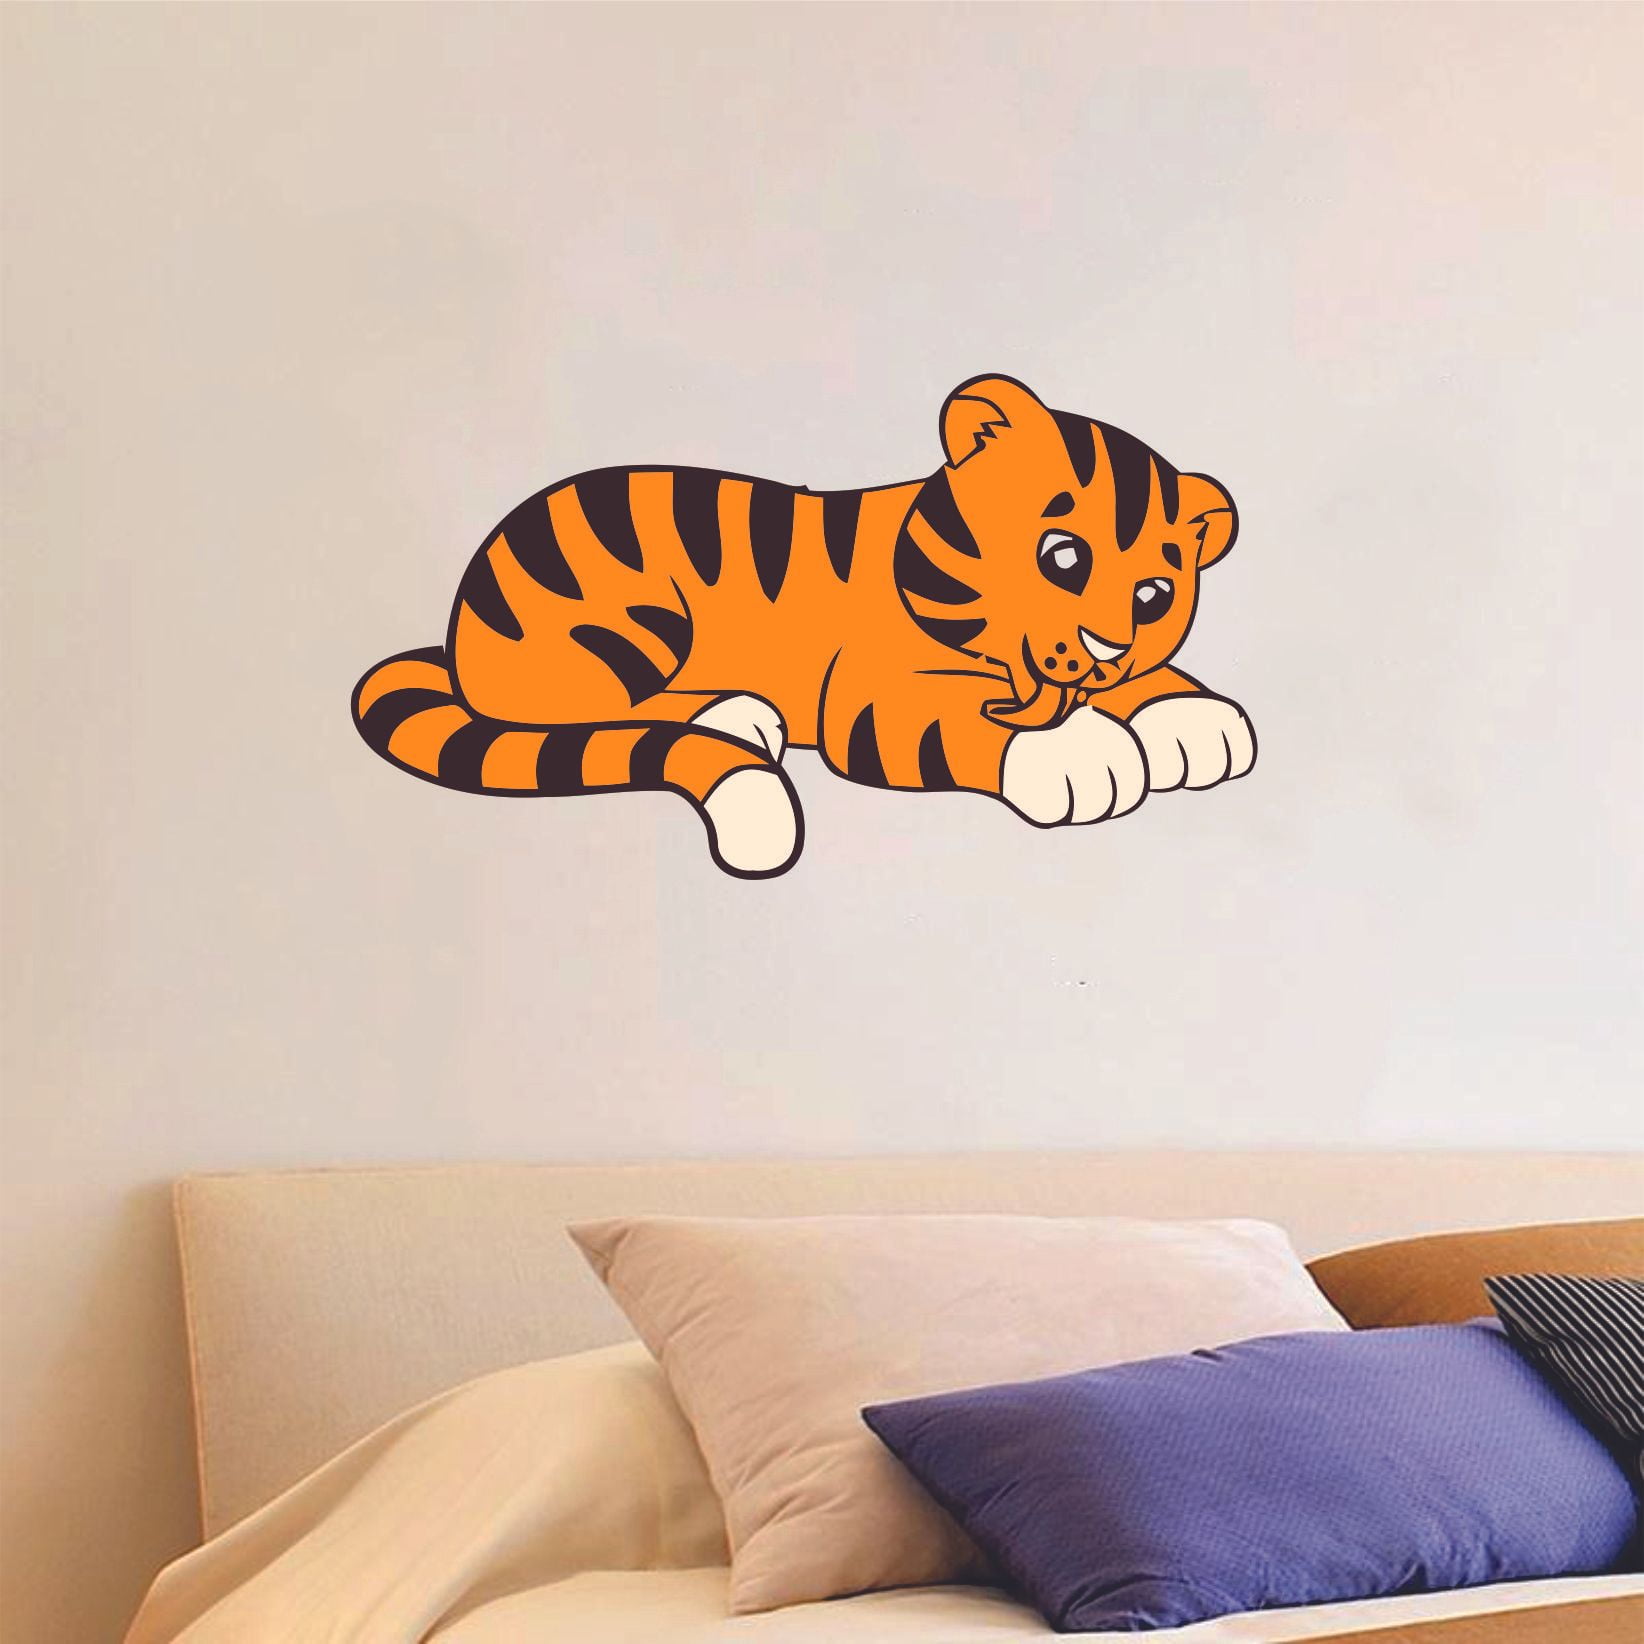 Removable Cute Zoo Animals Wall Sticker Decal For Kids Nursery Baby Room Decor